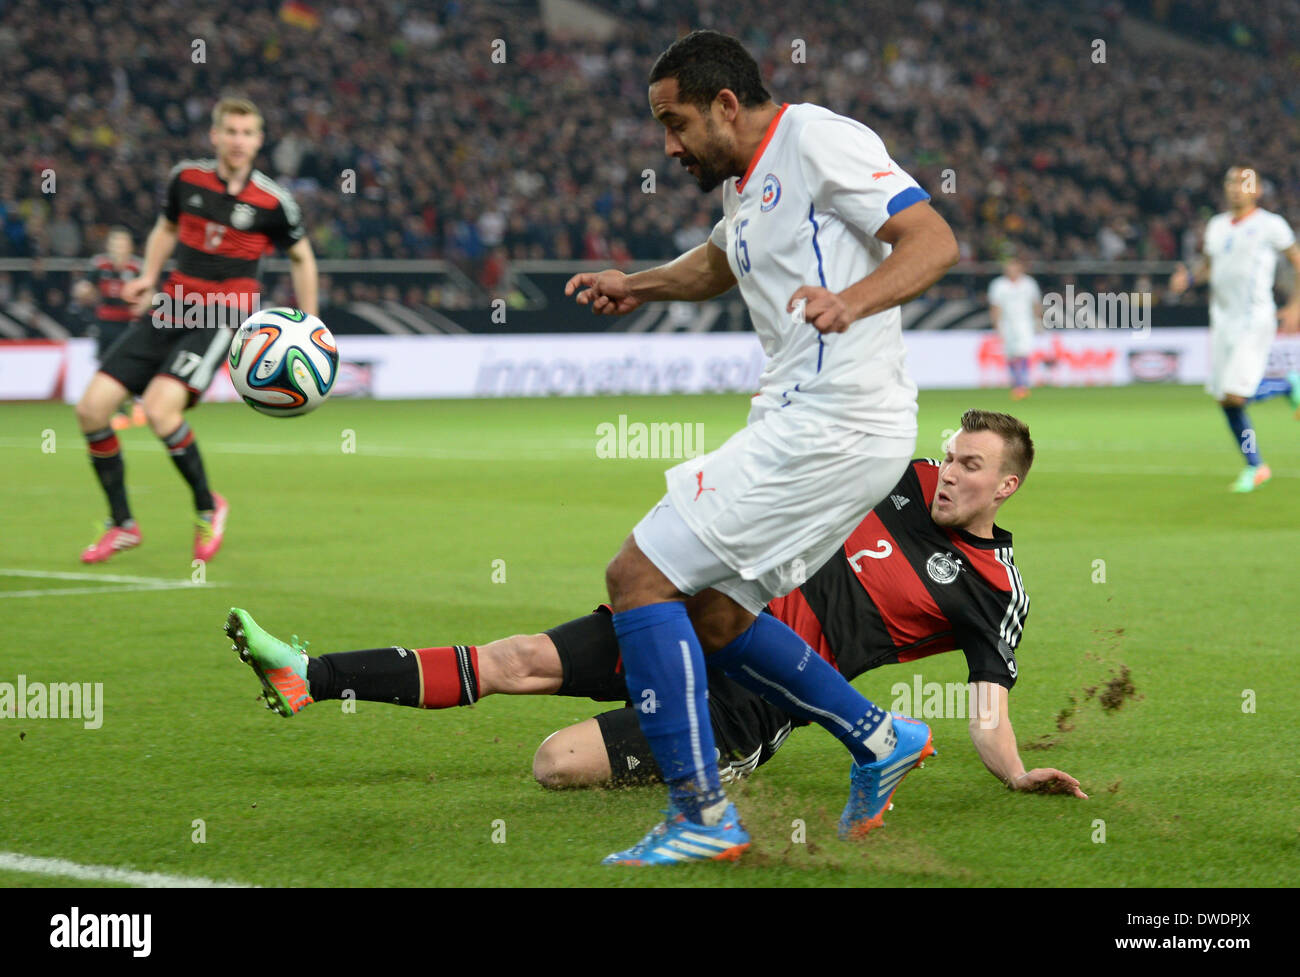 Stuttgart, Germany. 05th Mar, 2014. Germany's Kevin Großkreutz (R) vies for the ball with Chile's Jean Beausejour during the international friendly match between Germany and Chile at Mercedes-Benz-Arena in Stuttgart, Germany, 05 March 2014. Photo: Andreas Gebert/dpa/Alamy Live News Stock Photo